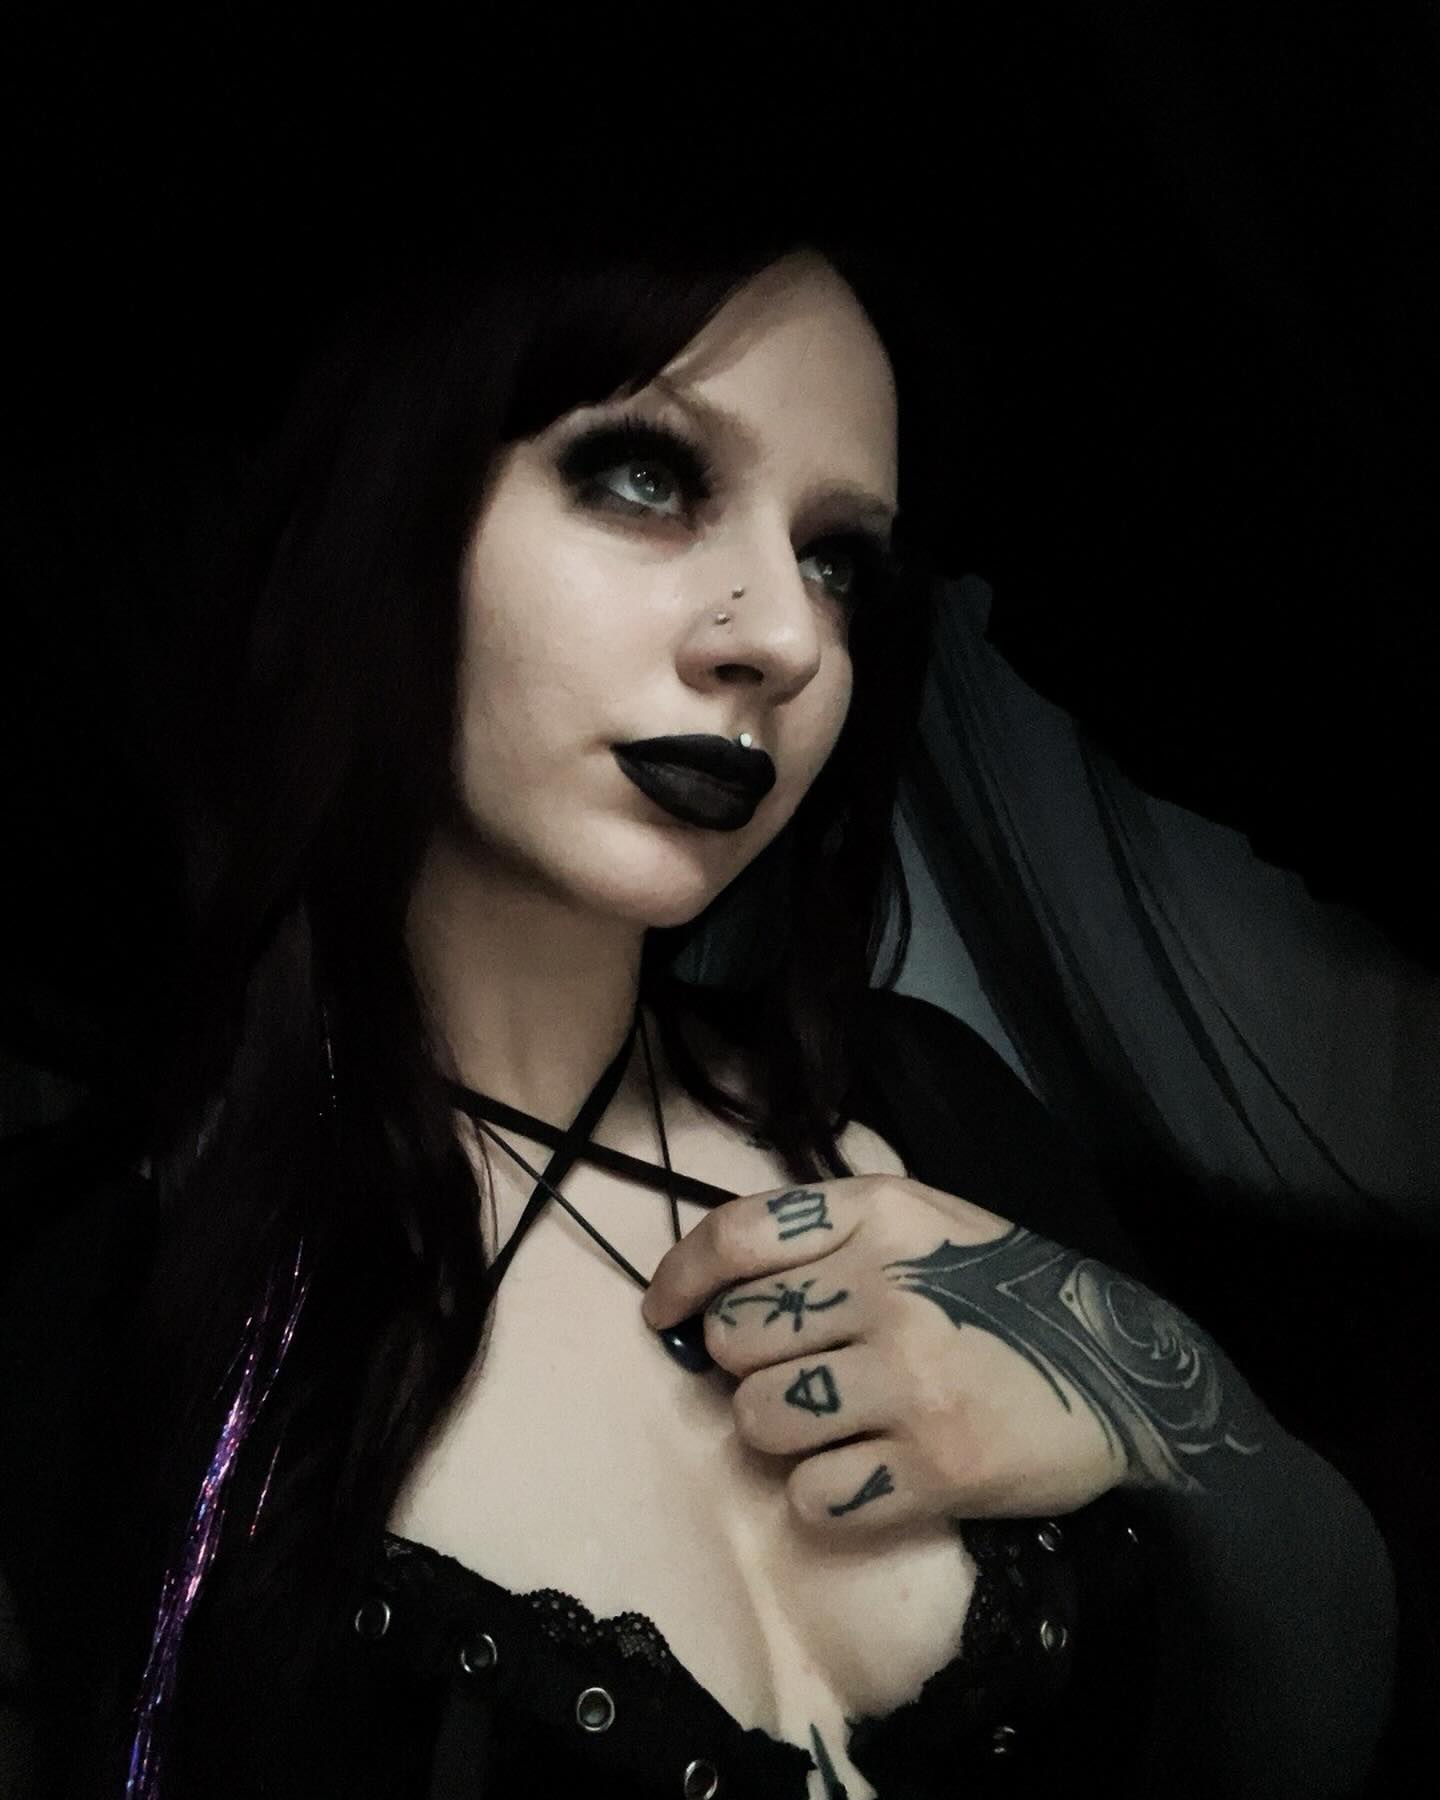 Just me, being really pretty and mysterious… 🧛🏻‍♀️ if you care at all 
Stream music by @notamiraa 🥹🖤 so happy I discovered her music